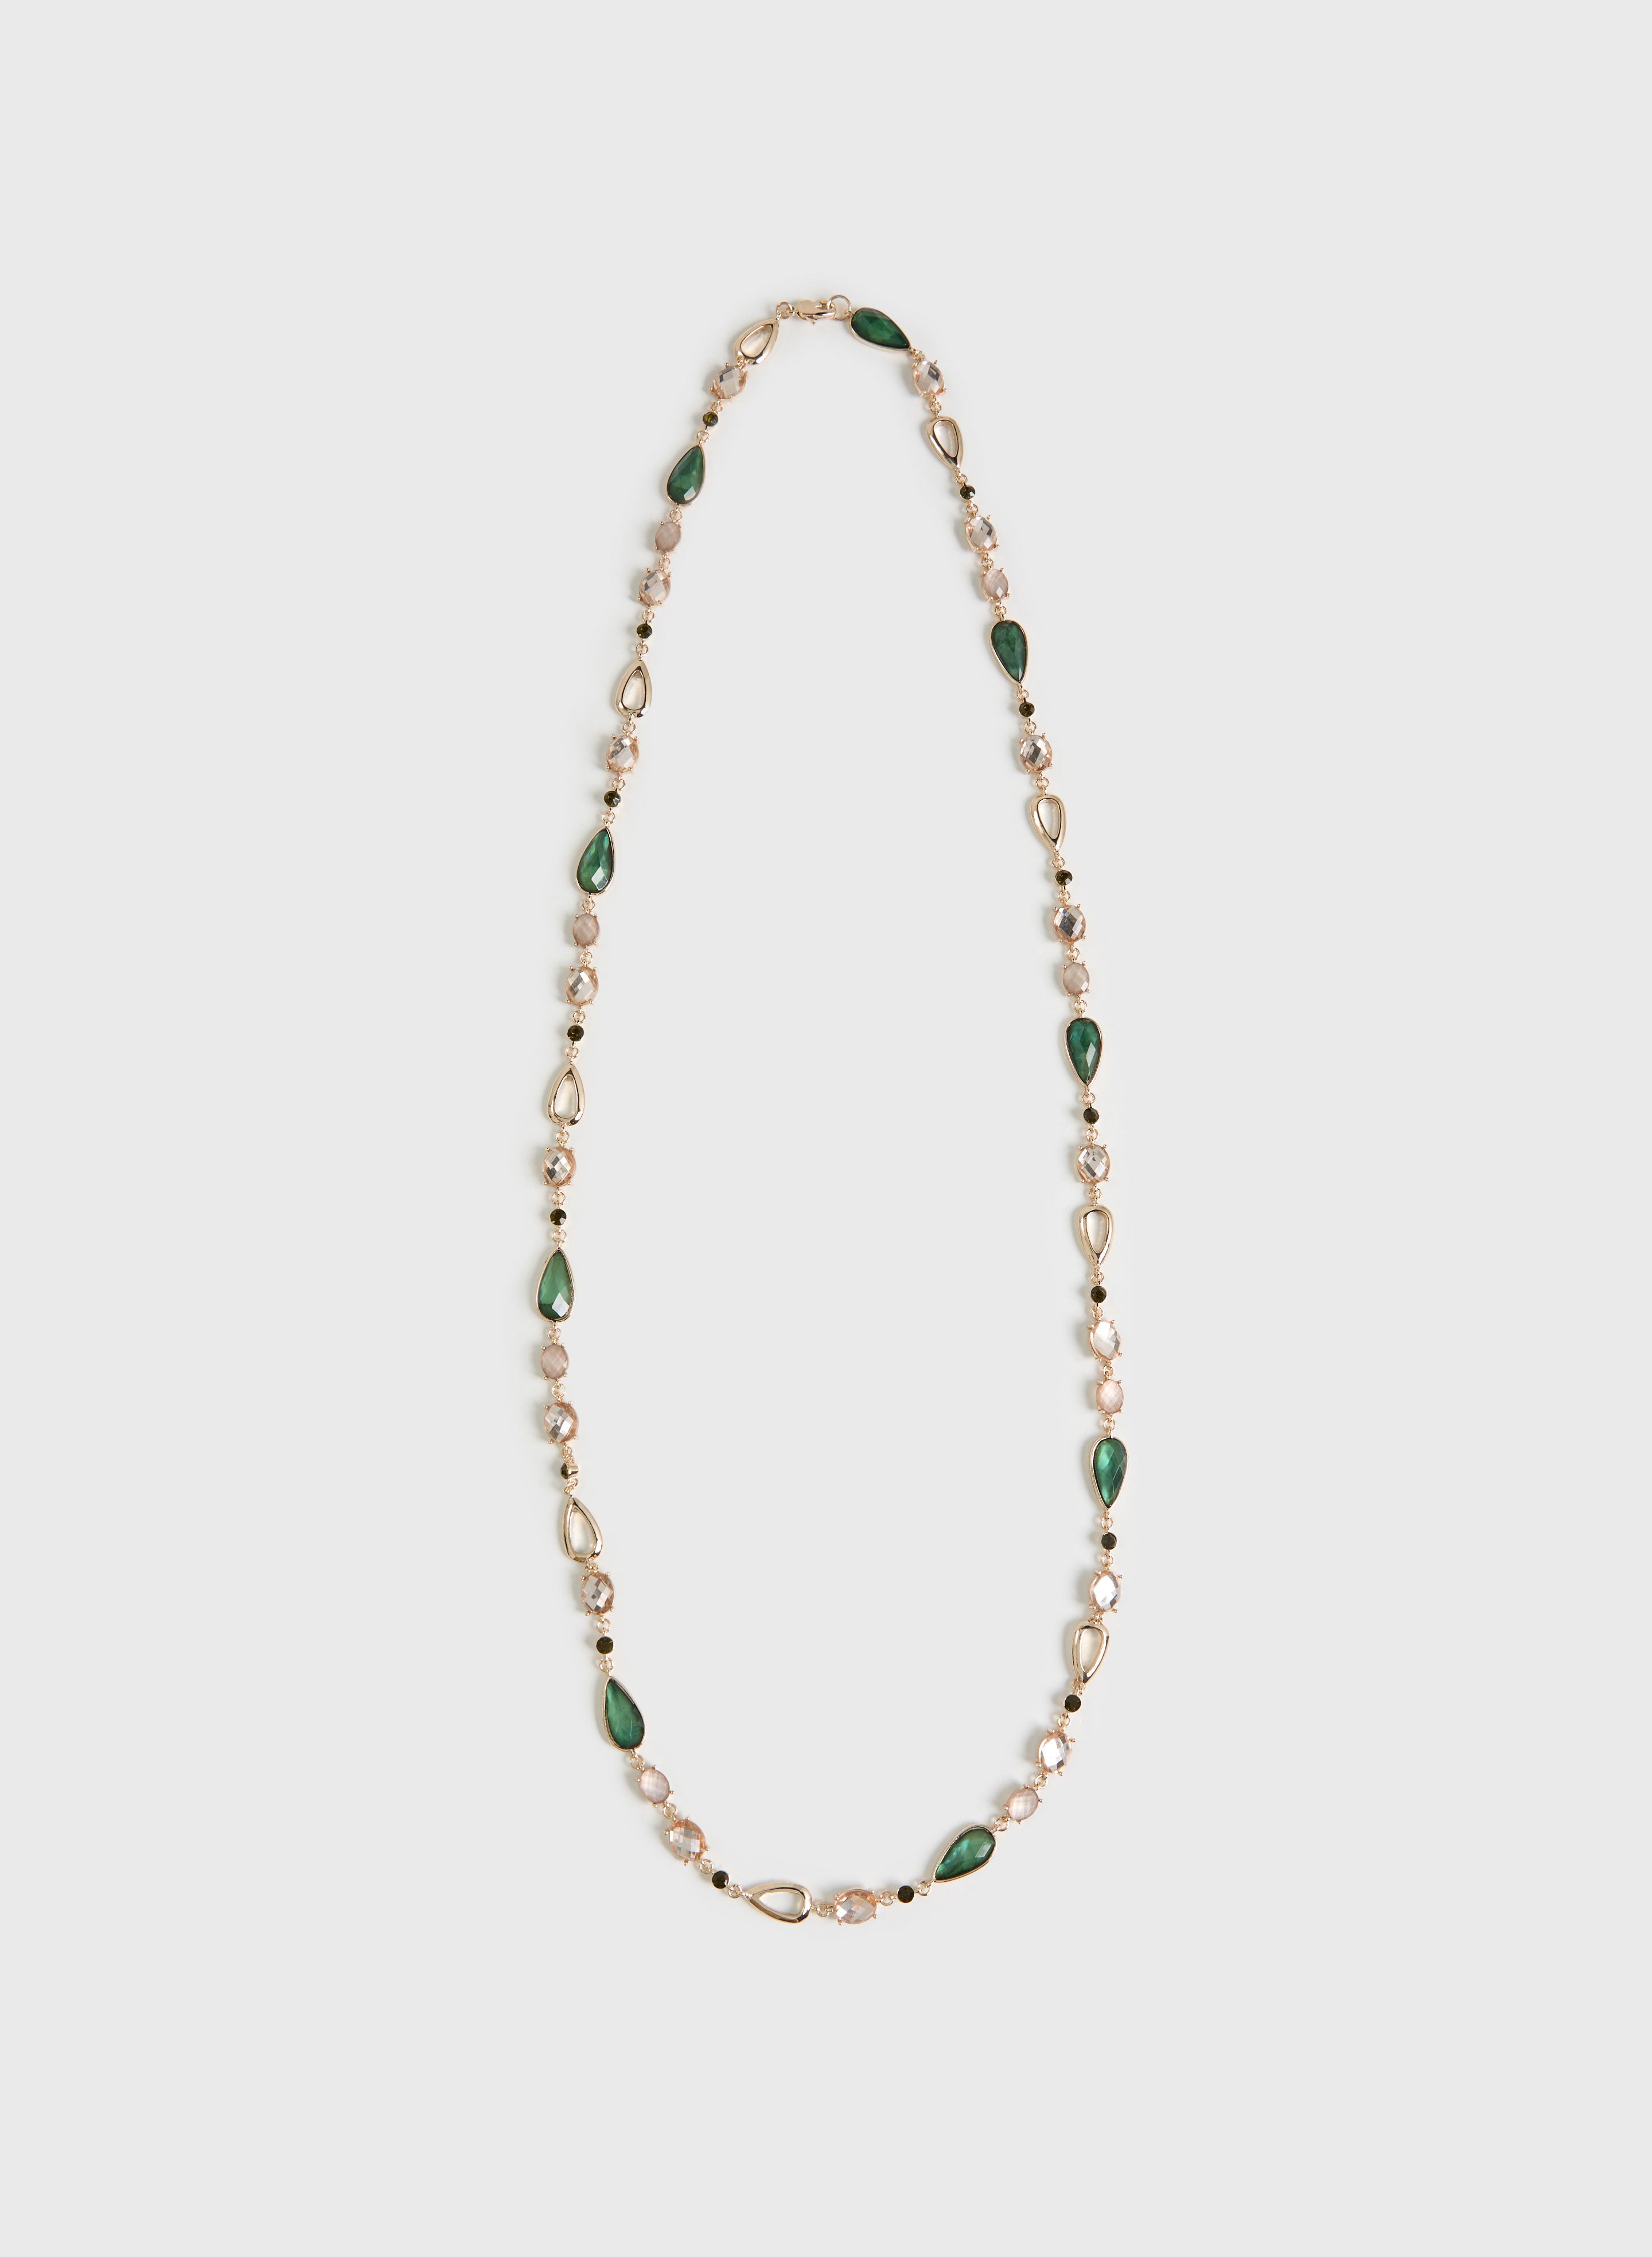 Links & Faceted Stones Necklace